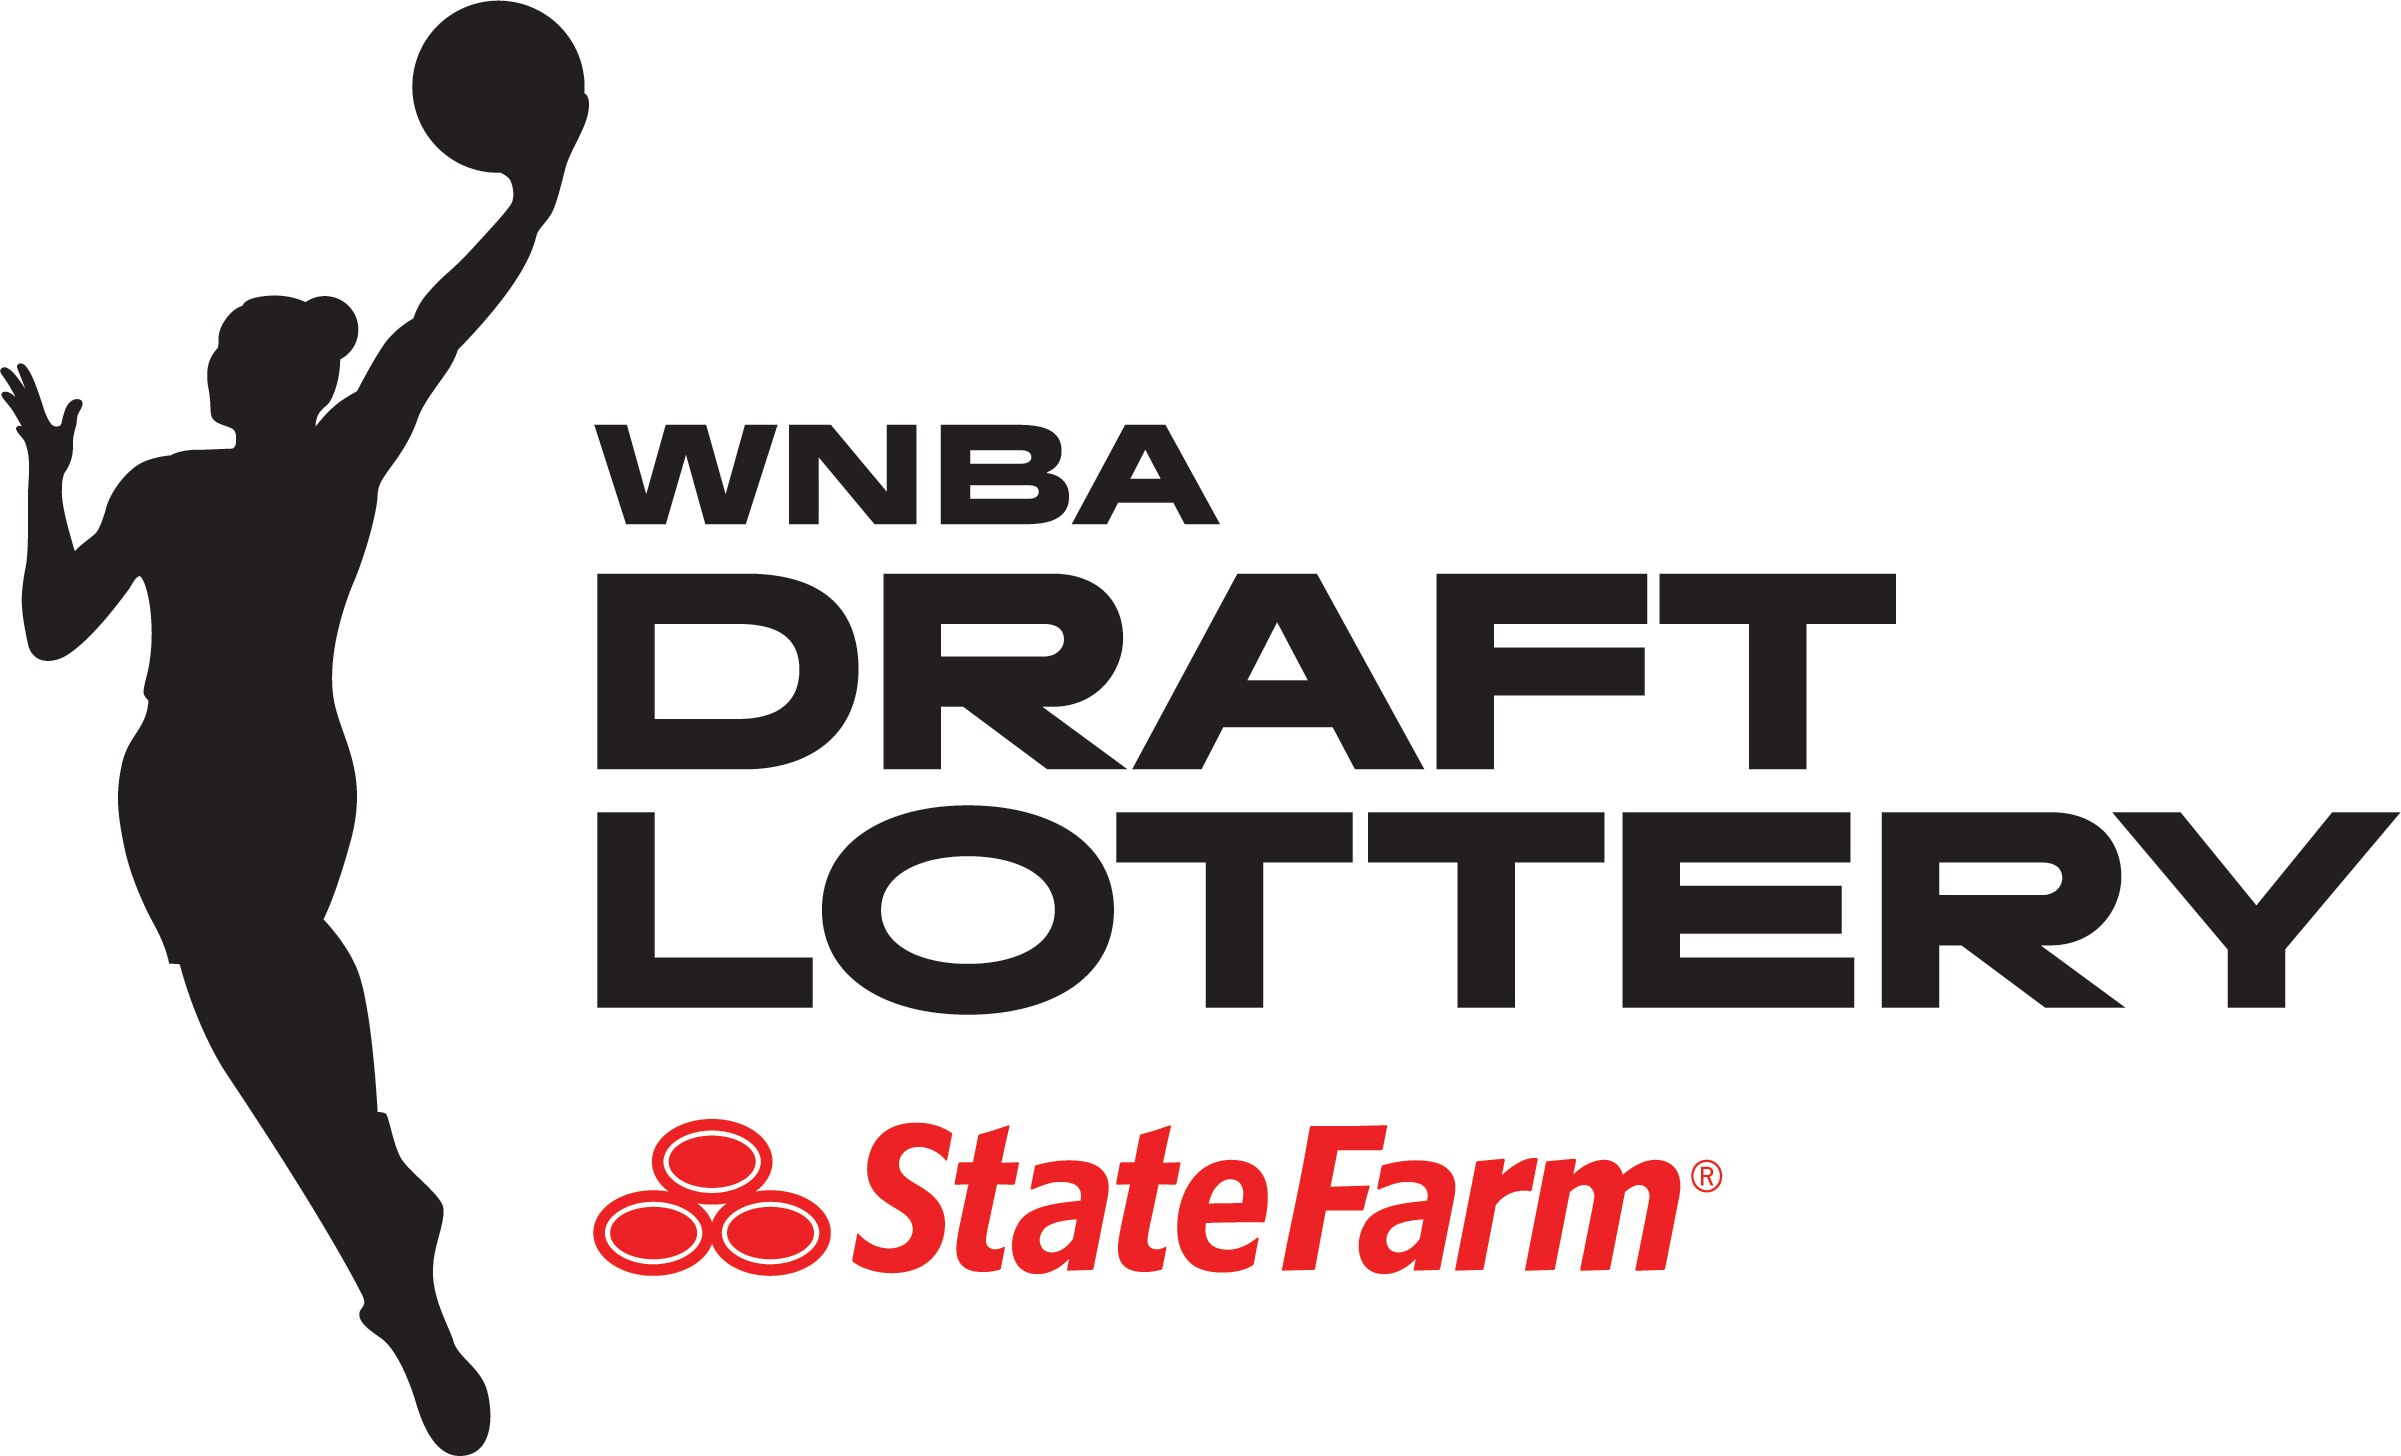 WNBA Draft Lottery results: Indiana Fever wins 1st pick in 2023